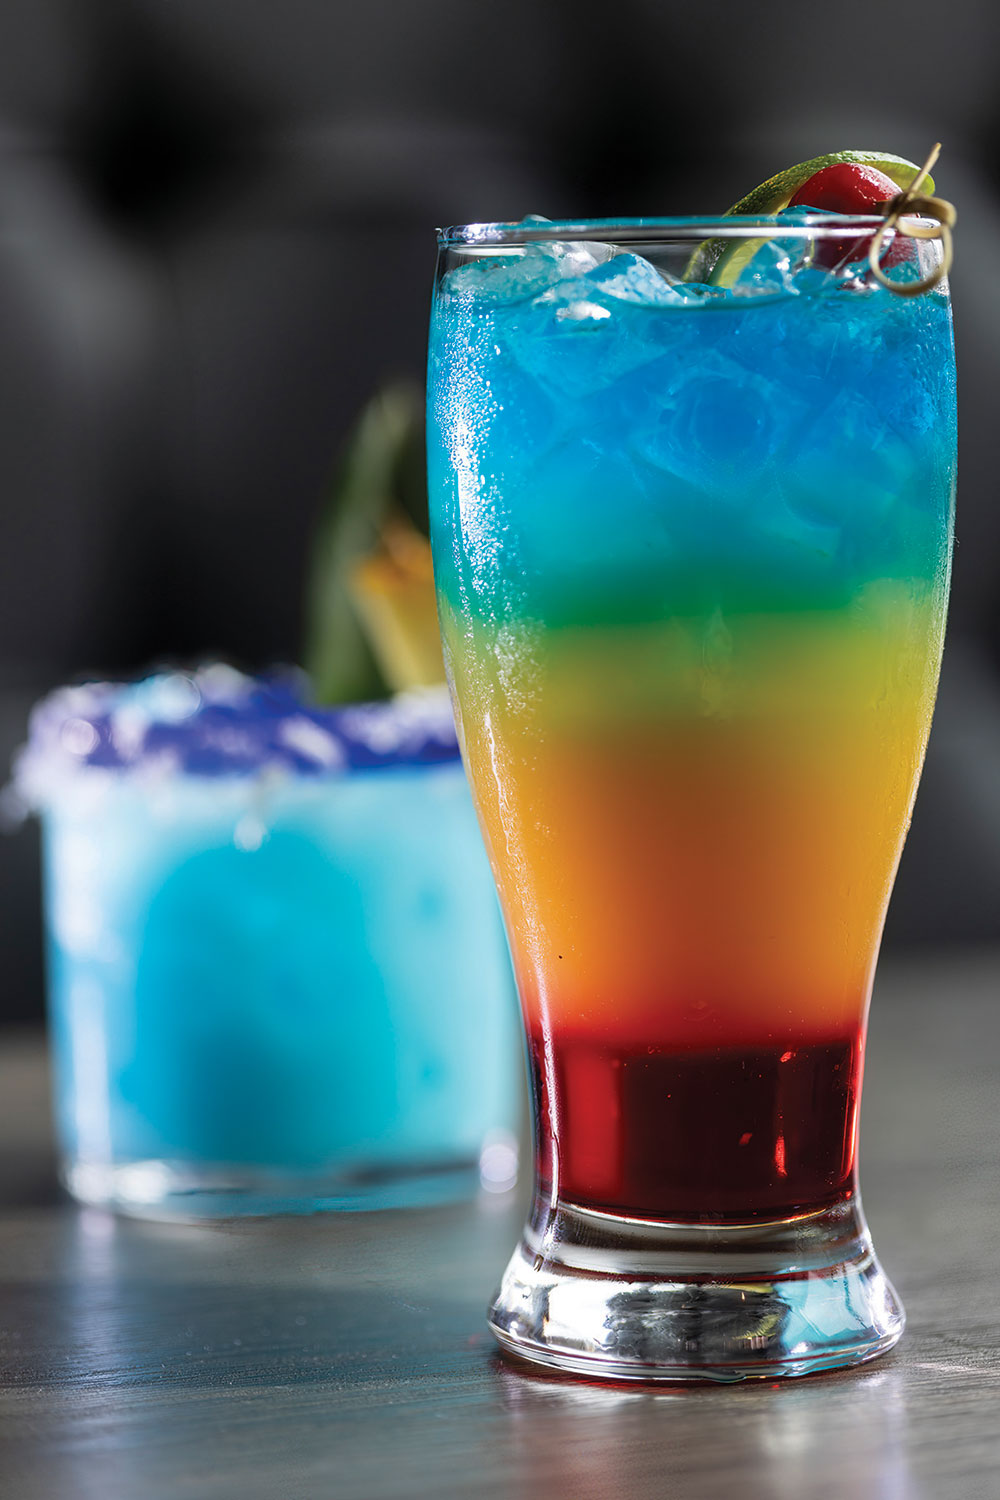 The Rainbow Paradise cocktail layers blue curacao liqueur, rum, pineapple juice, and grenadine syrup.